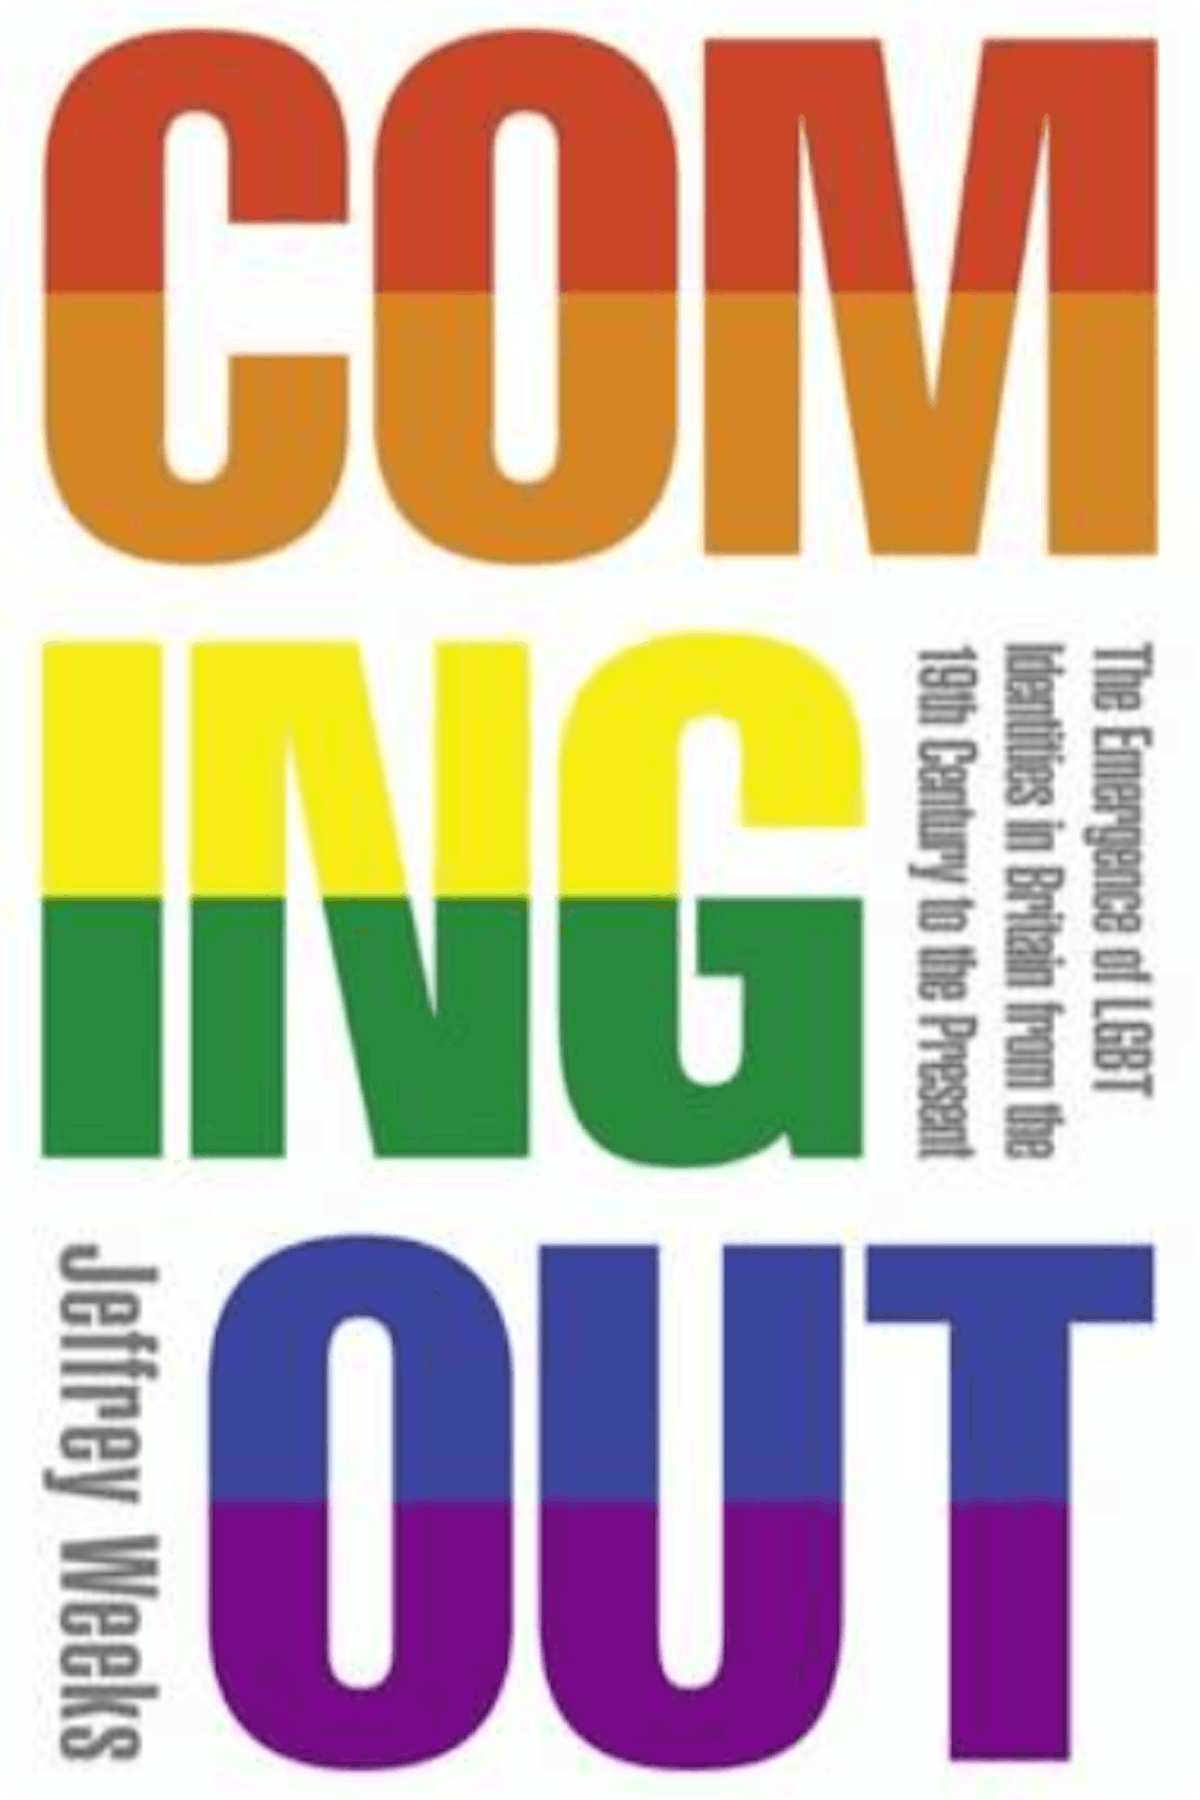 Coming Out: The Emergence of LGBT Identities in Britain from the 19th Century to the Present book cover.